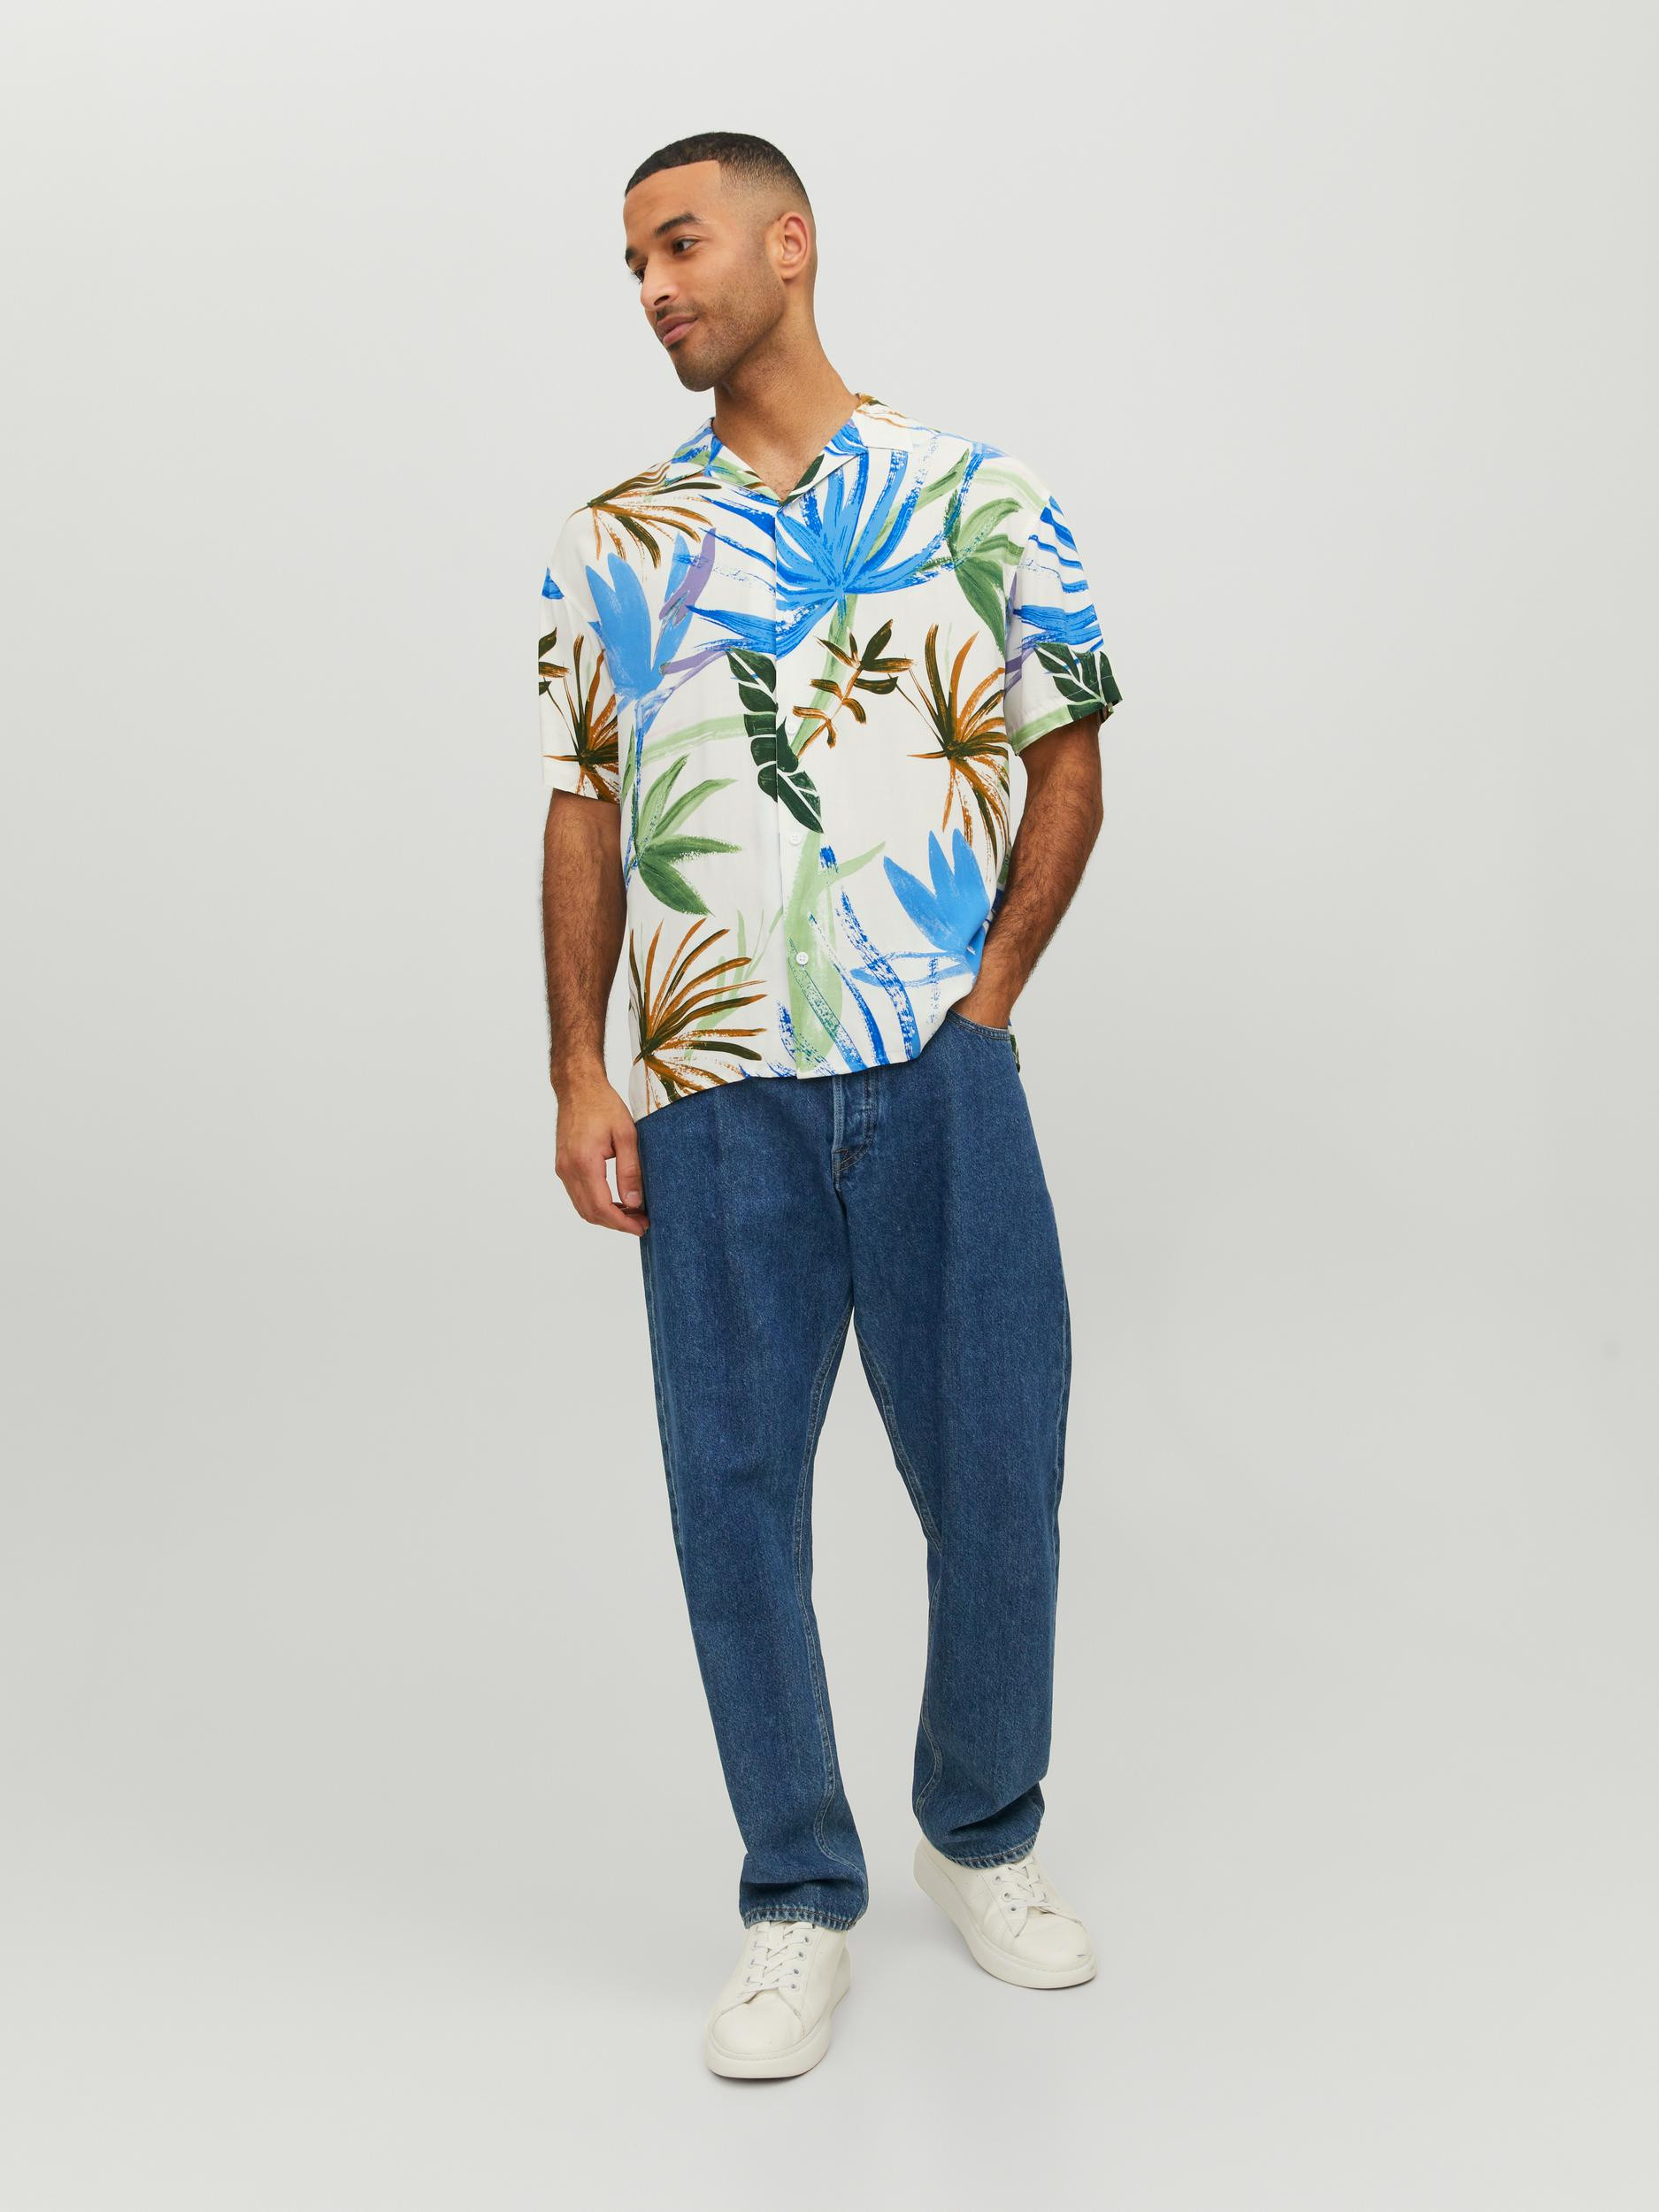 Jack & Jones - Relaxed fit shirt with floral print, White, large image number 4